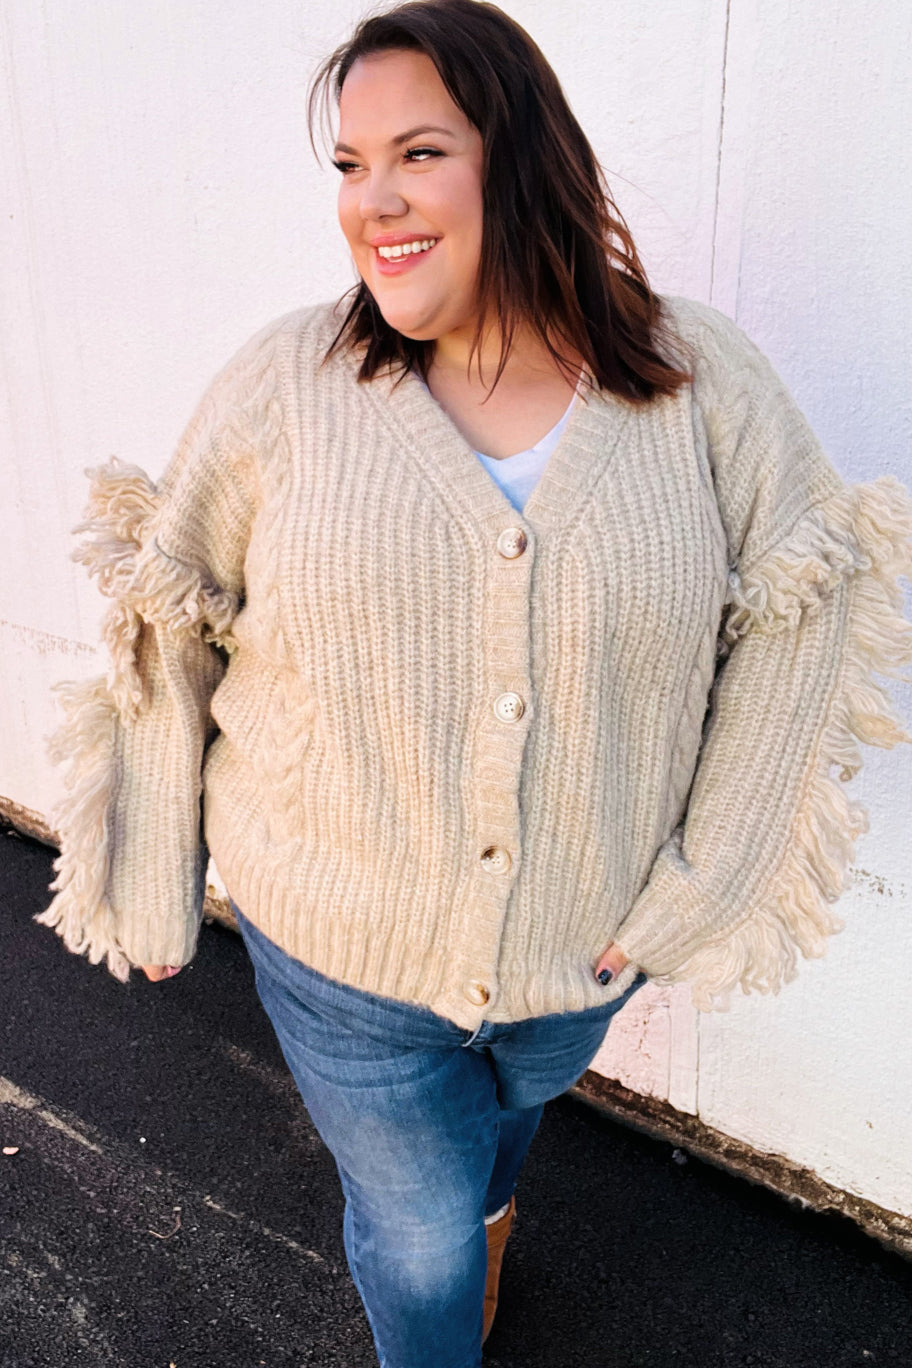 Way To Go - Chunky Cable Knit Cardigan